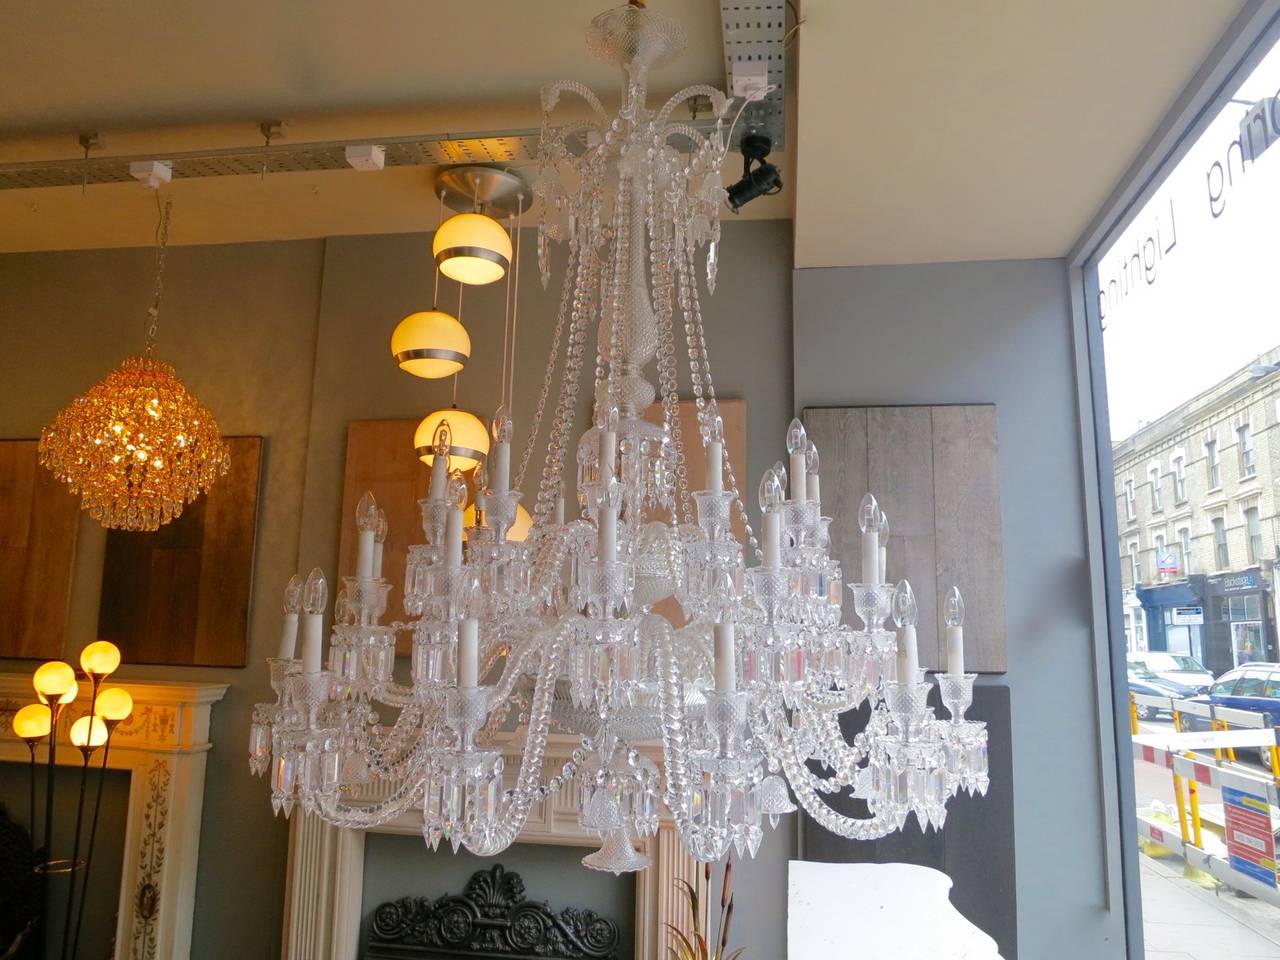 A large 36-arm Crystal chandelier designed by Philippe Starck for Baccarat Paris. Zenith Comete Model. Removed  from Ancaster House, Mayfair London. Former residence of Prince Jefri of Brunei, interior designed by Versace. 3 pairs of wall lights